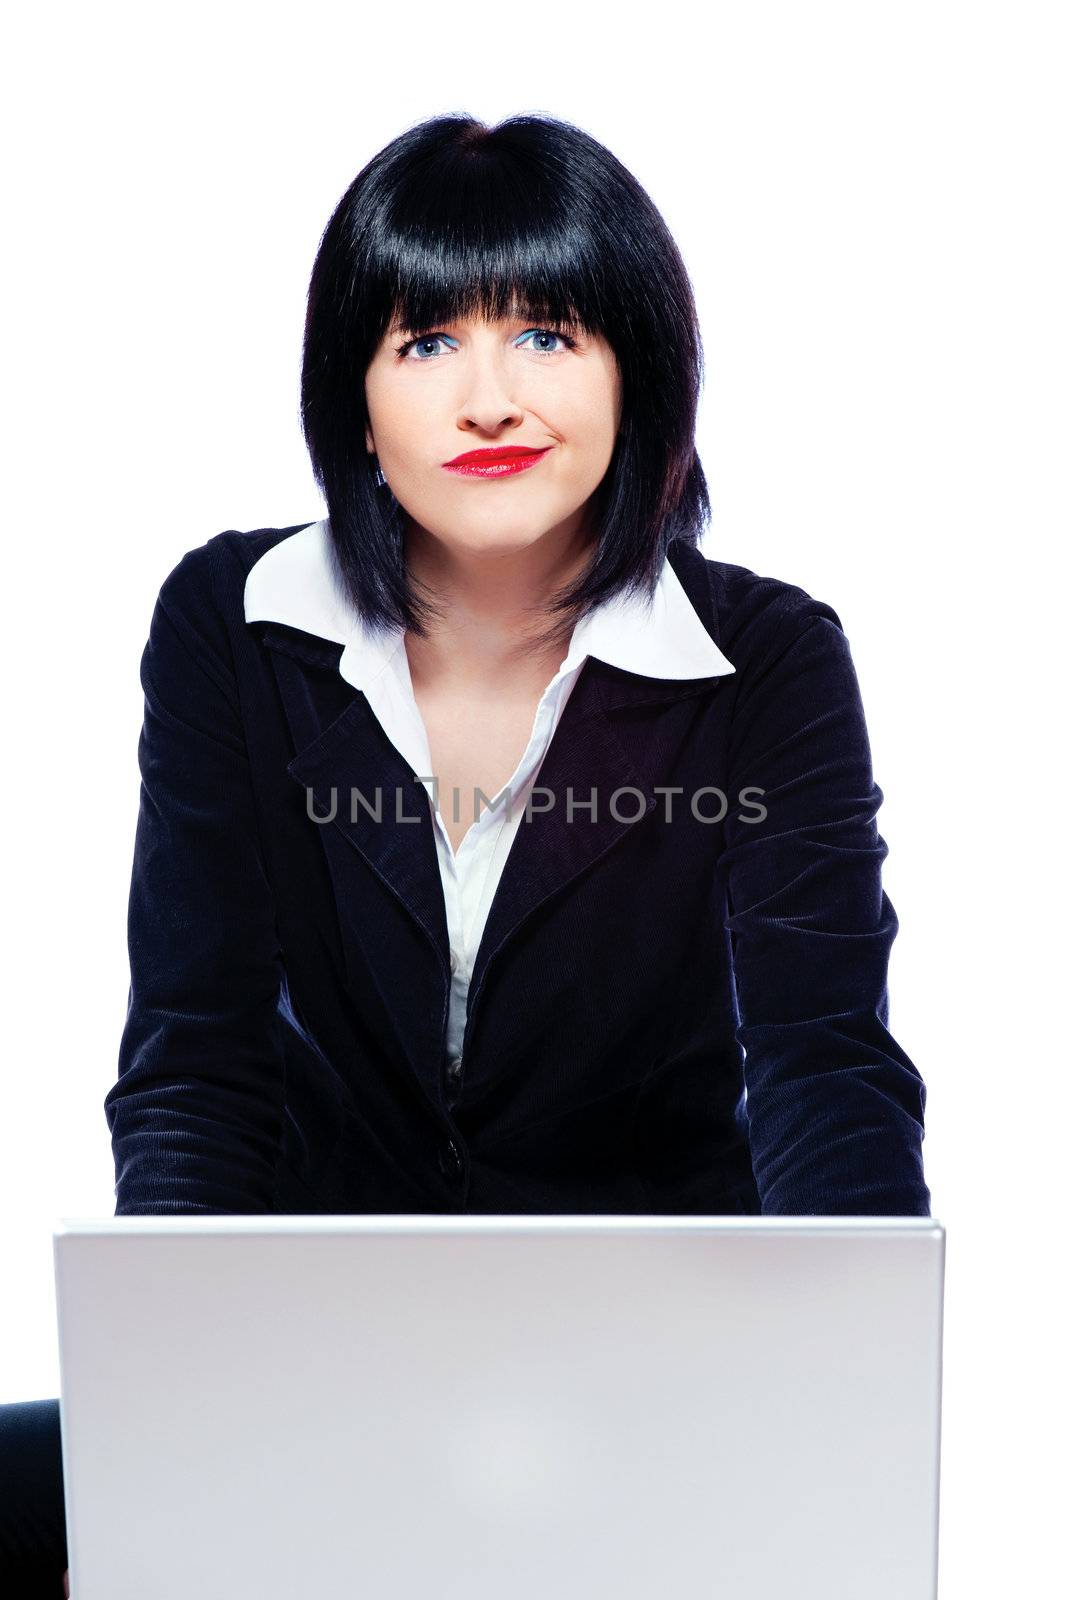 business woman behind laptop marveling, isolate on white